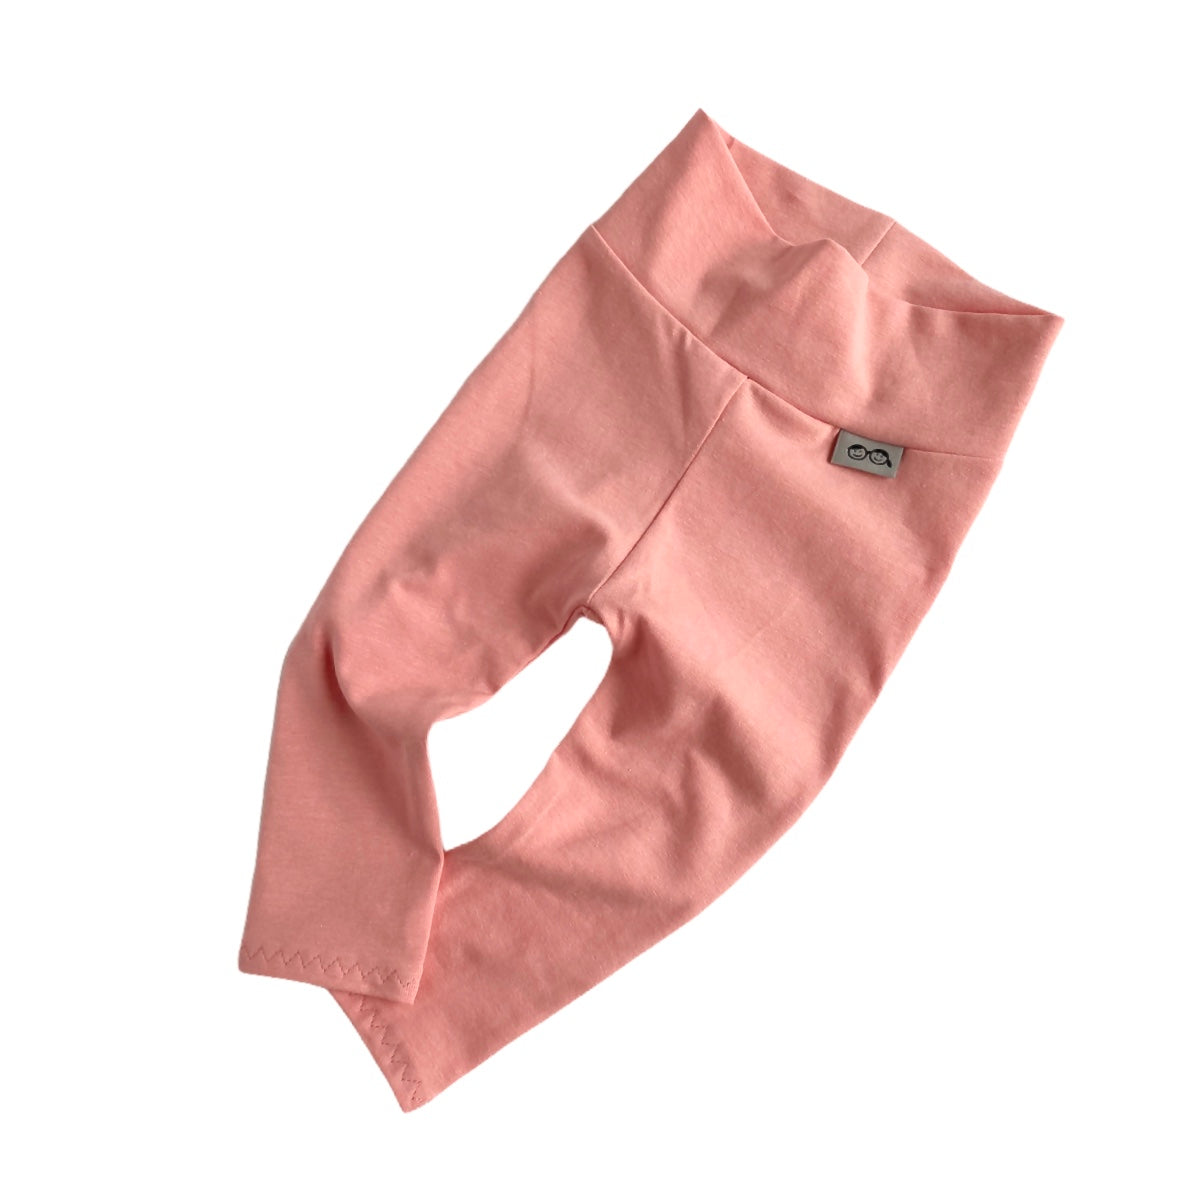 Dusty Pink Leggings and/or Headbands